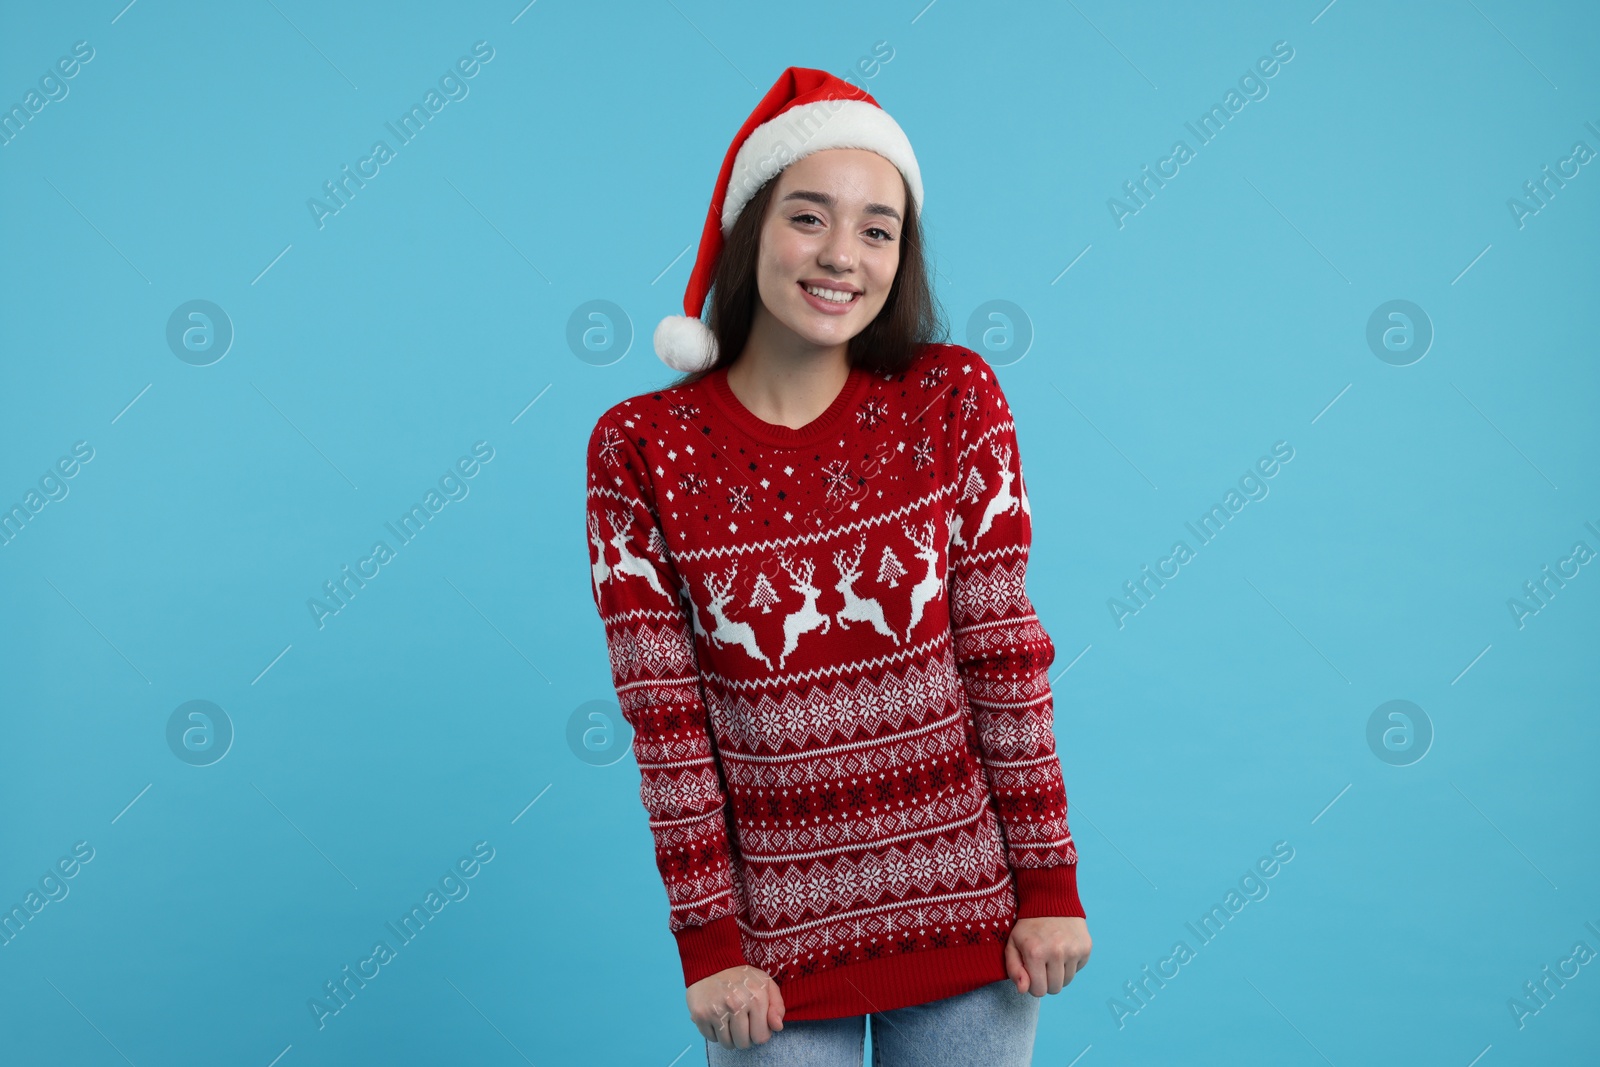 Photo of Happy young woman in Santa hat showing Christmas sweater on light blue background